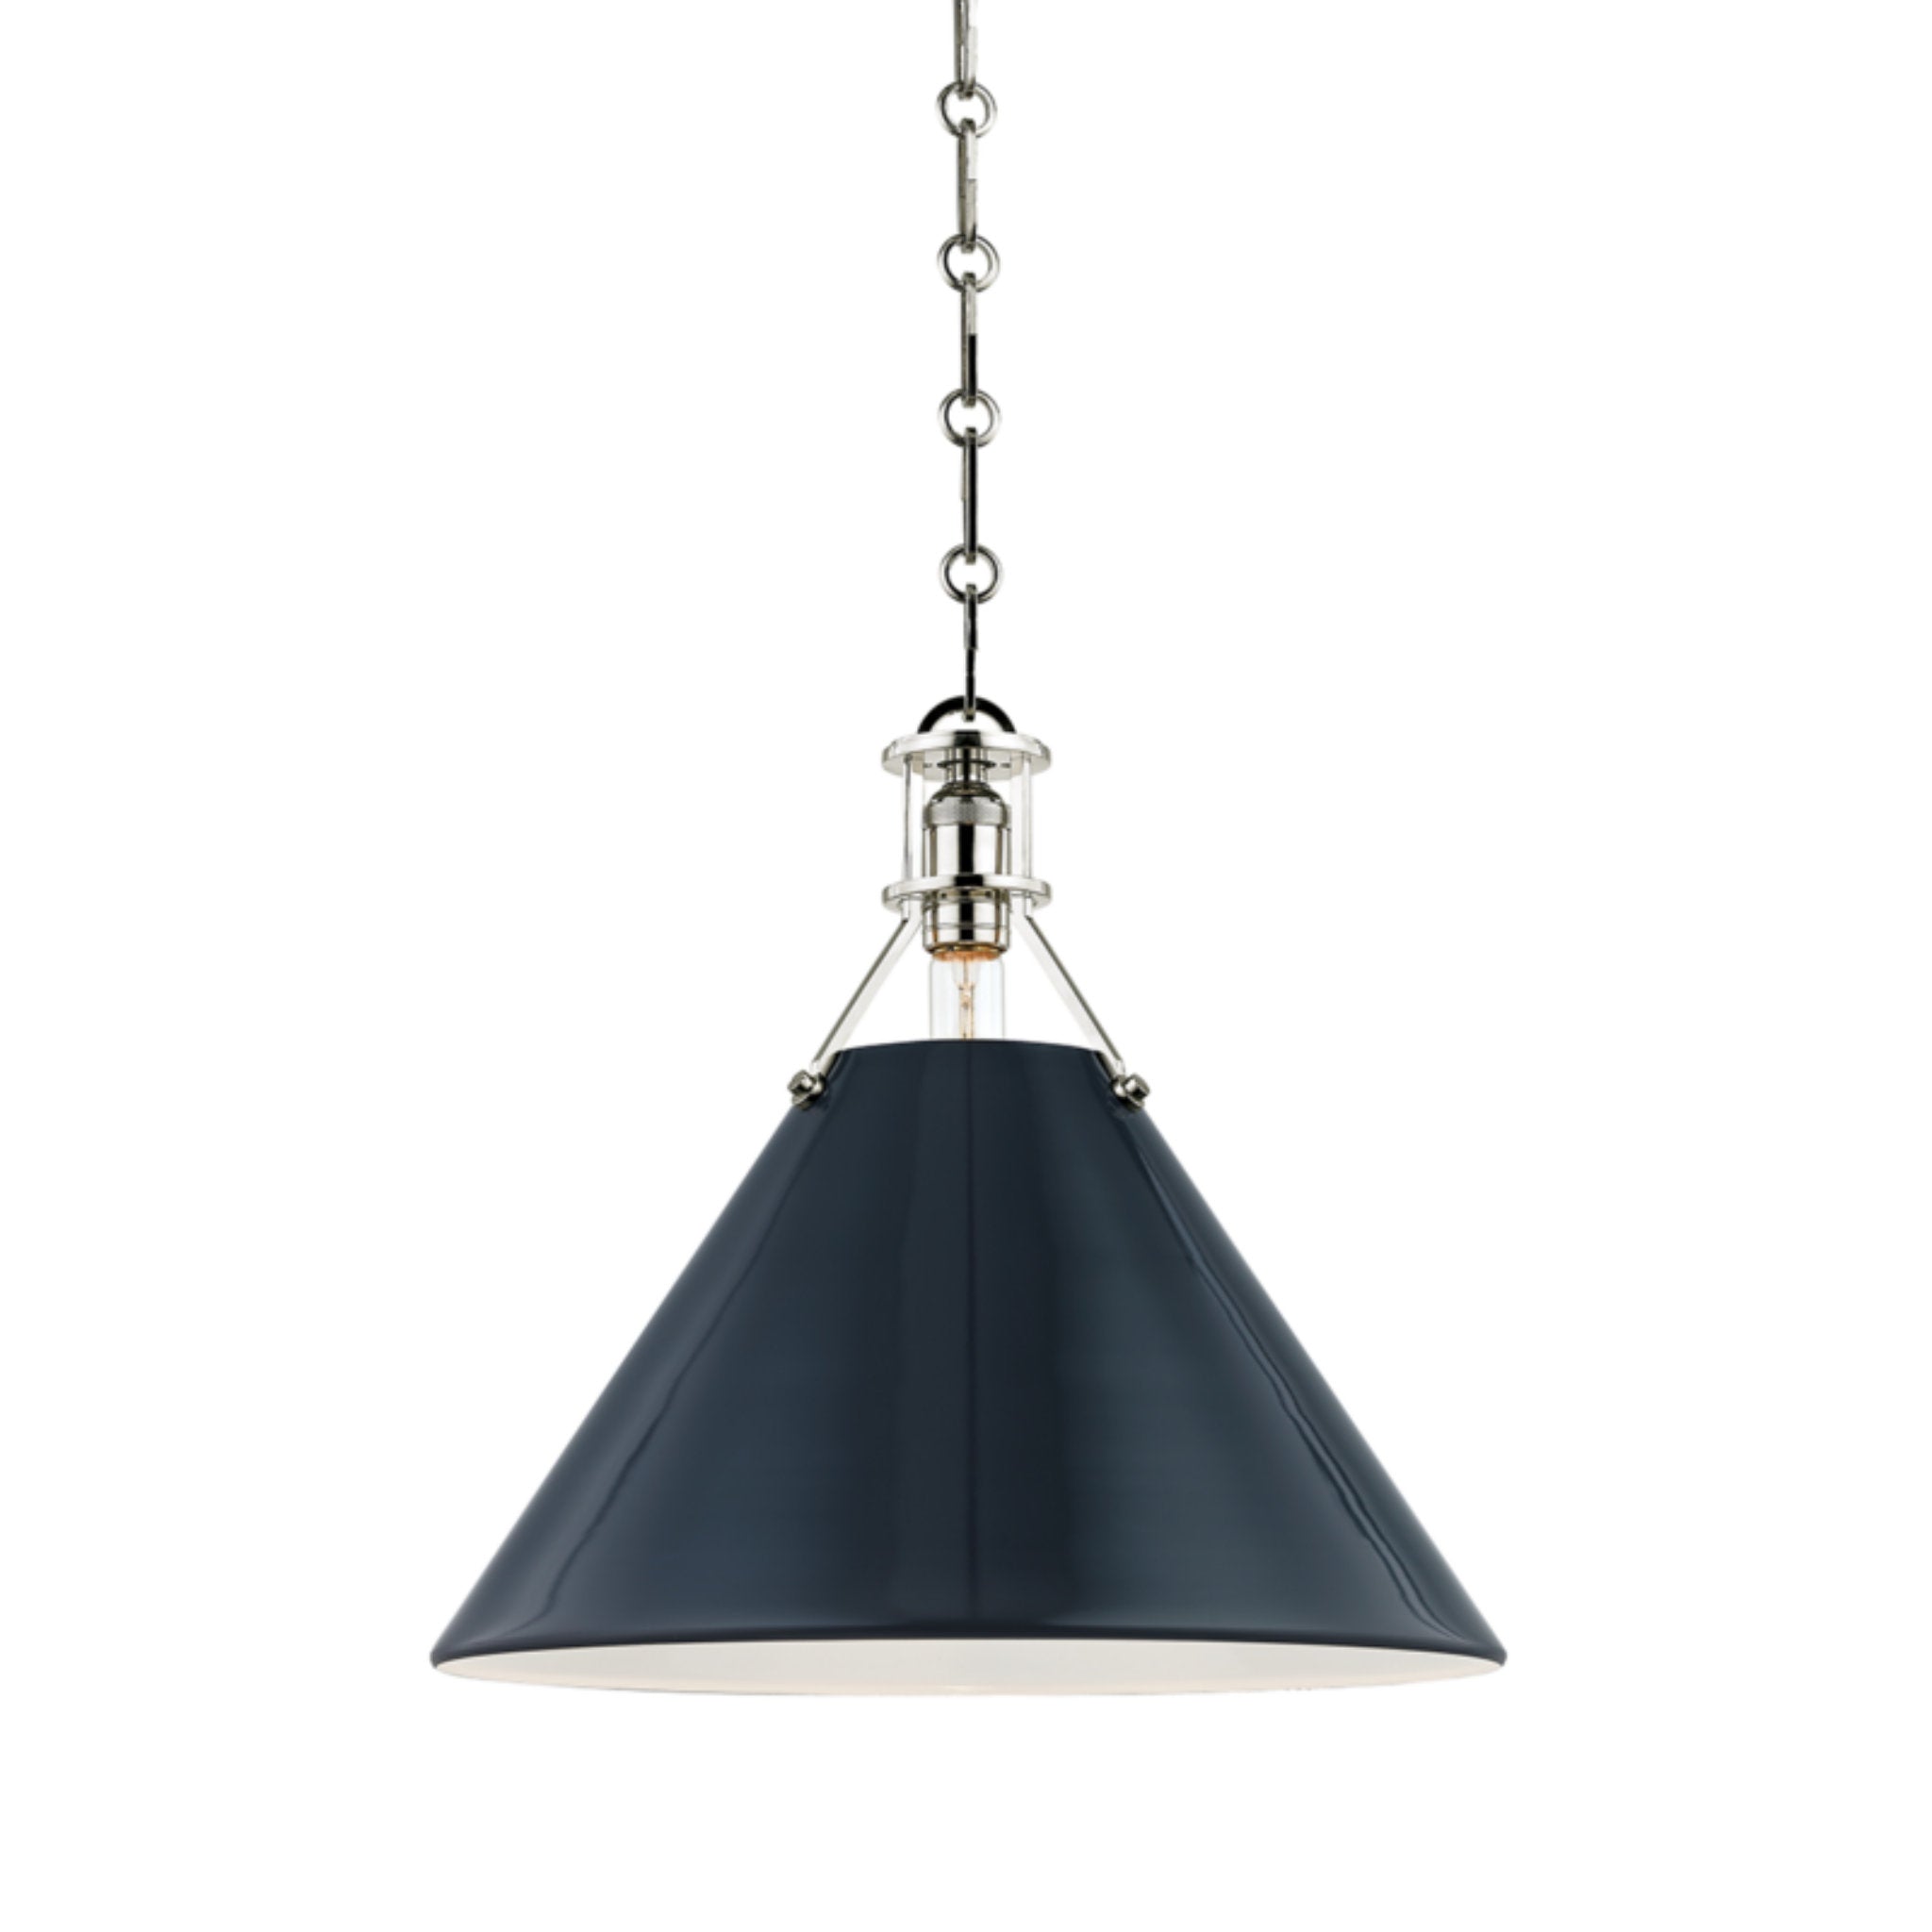 Painted No.2 1 Light Pendant in Polished Nickel/darkest Blue by Mark D. Sikes